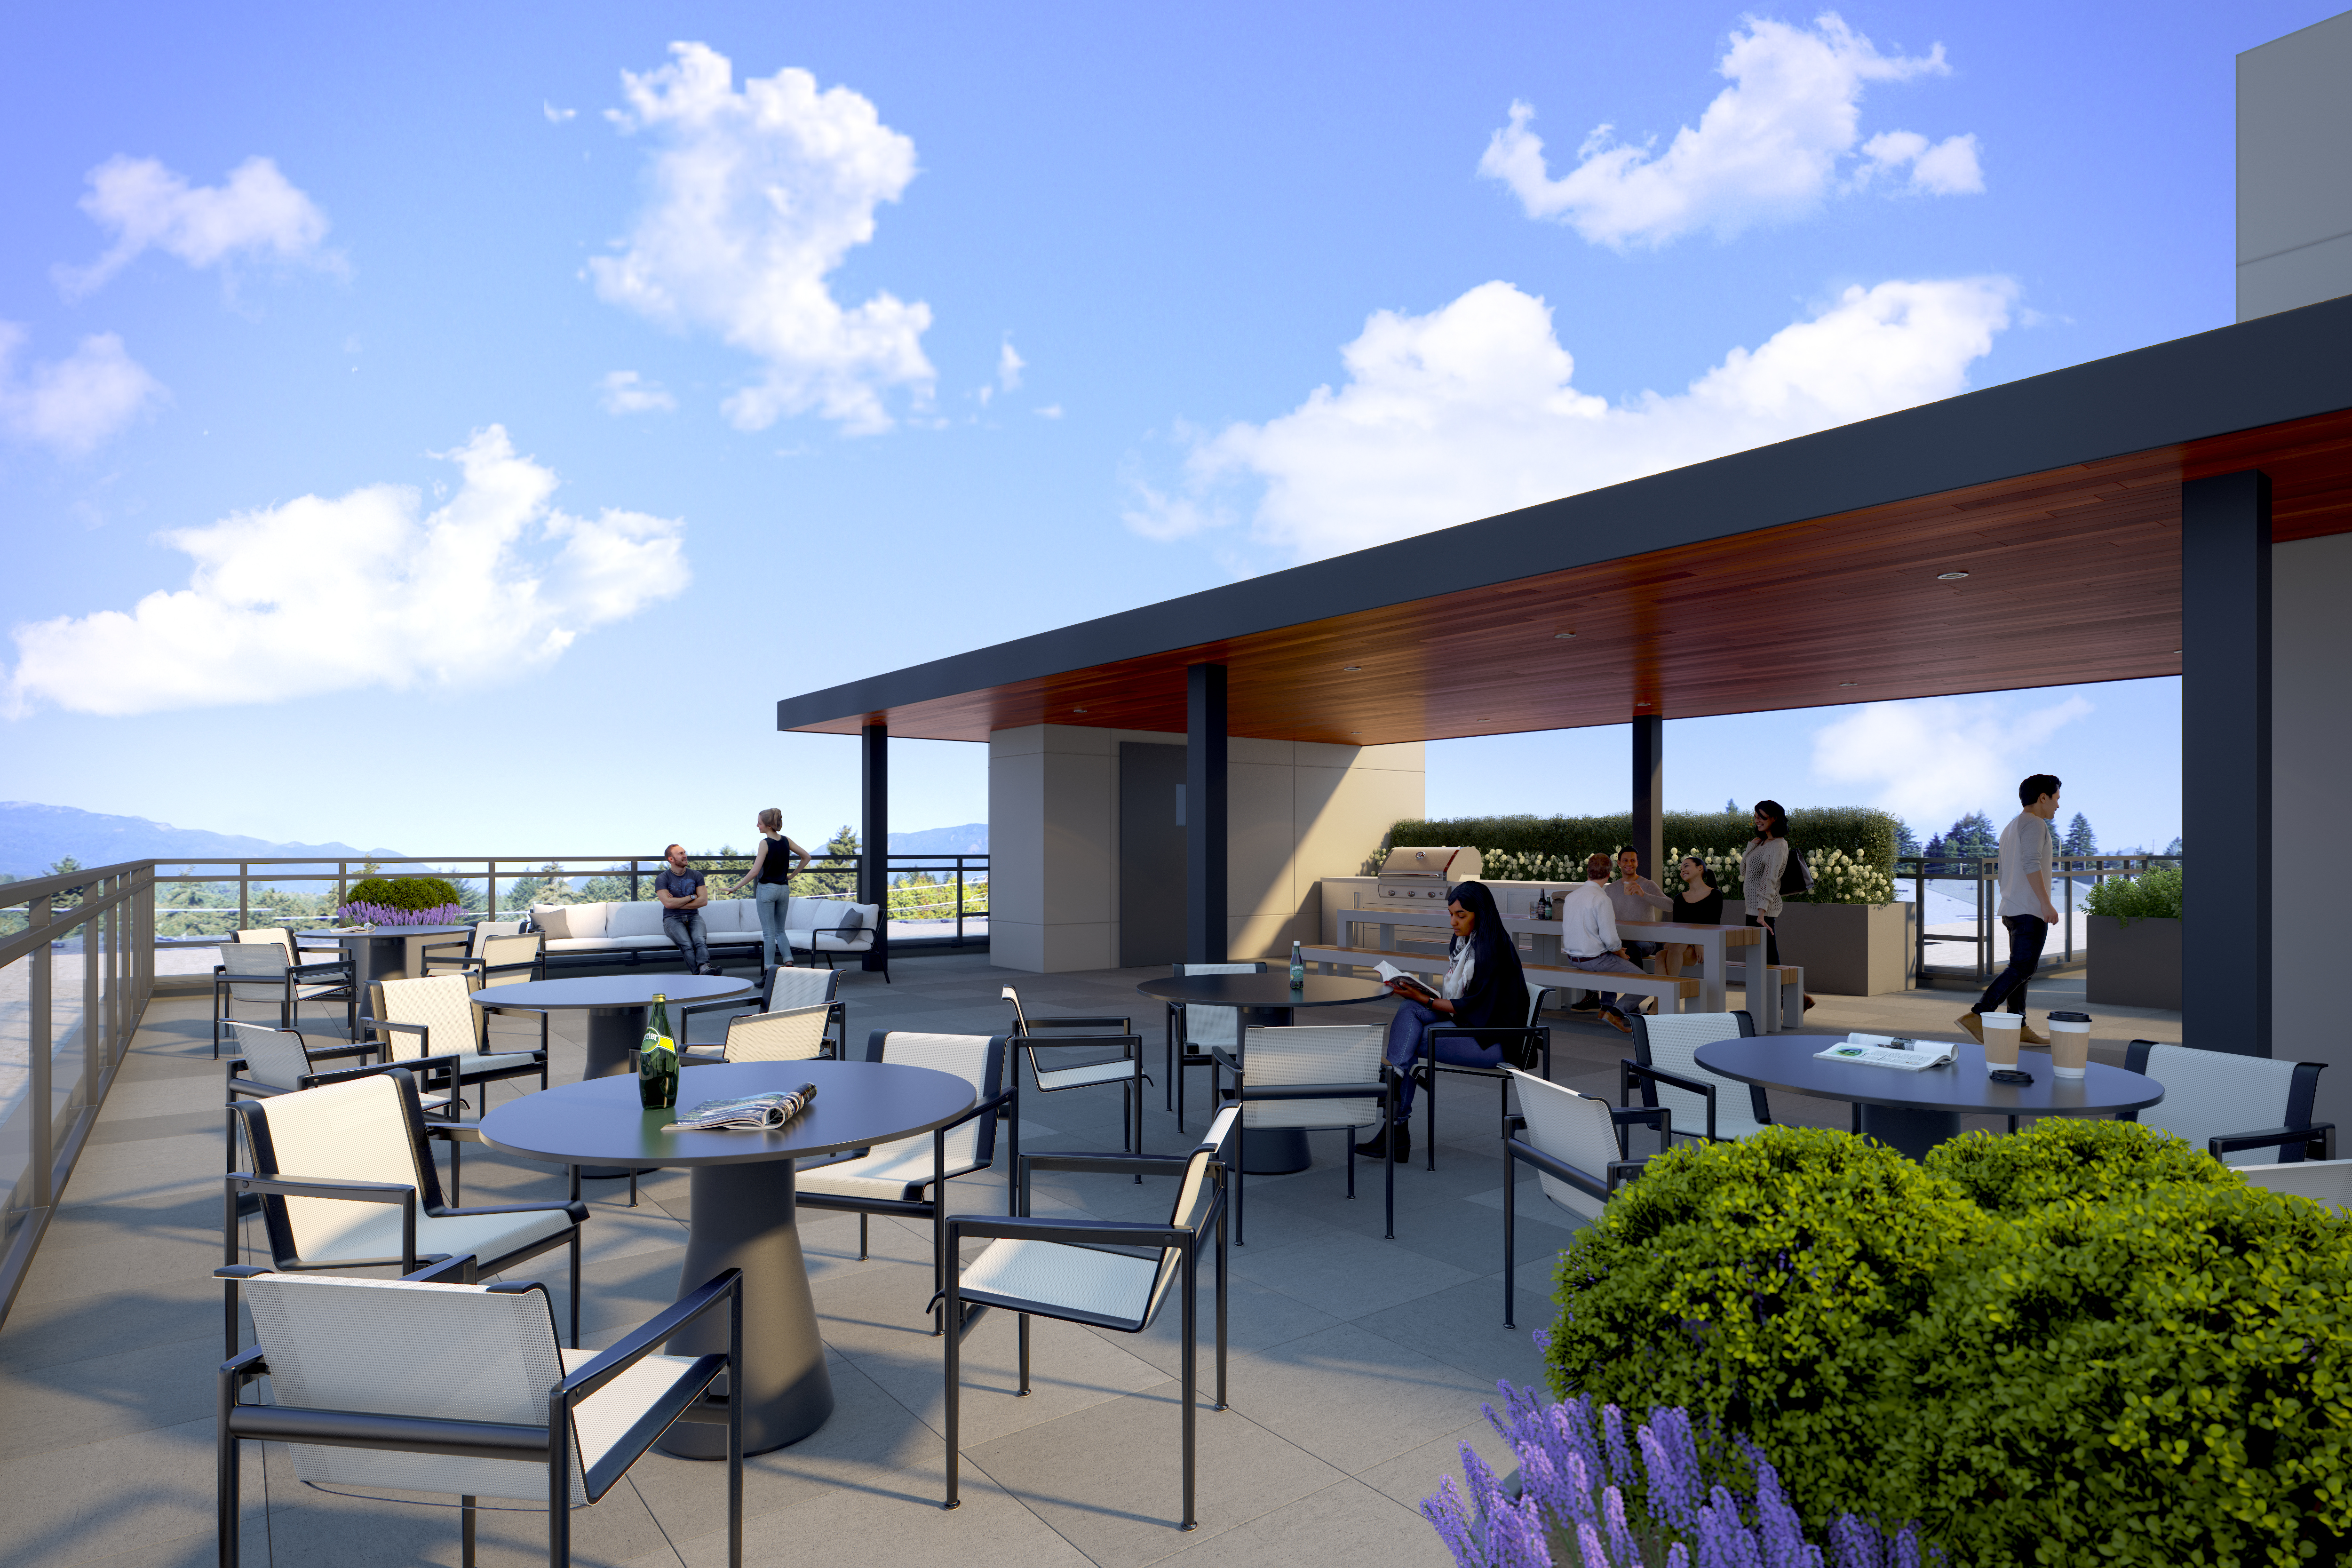 Shared rooftop terrace is a proposed amenity space for Regan West in Burquitlam.